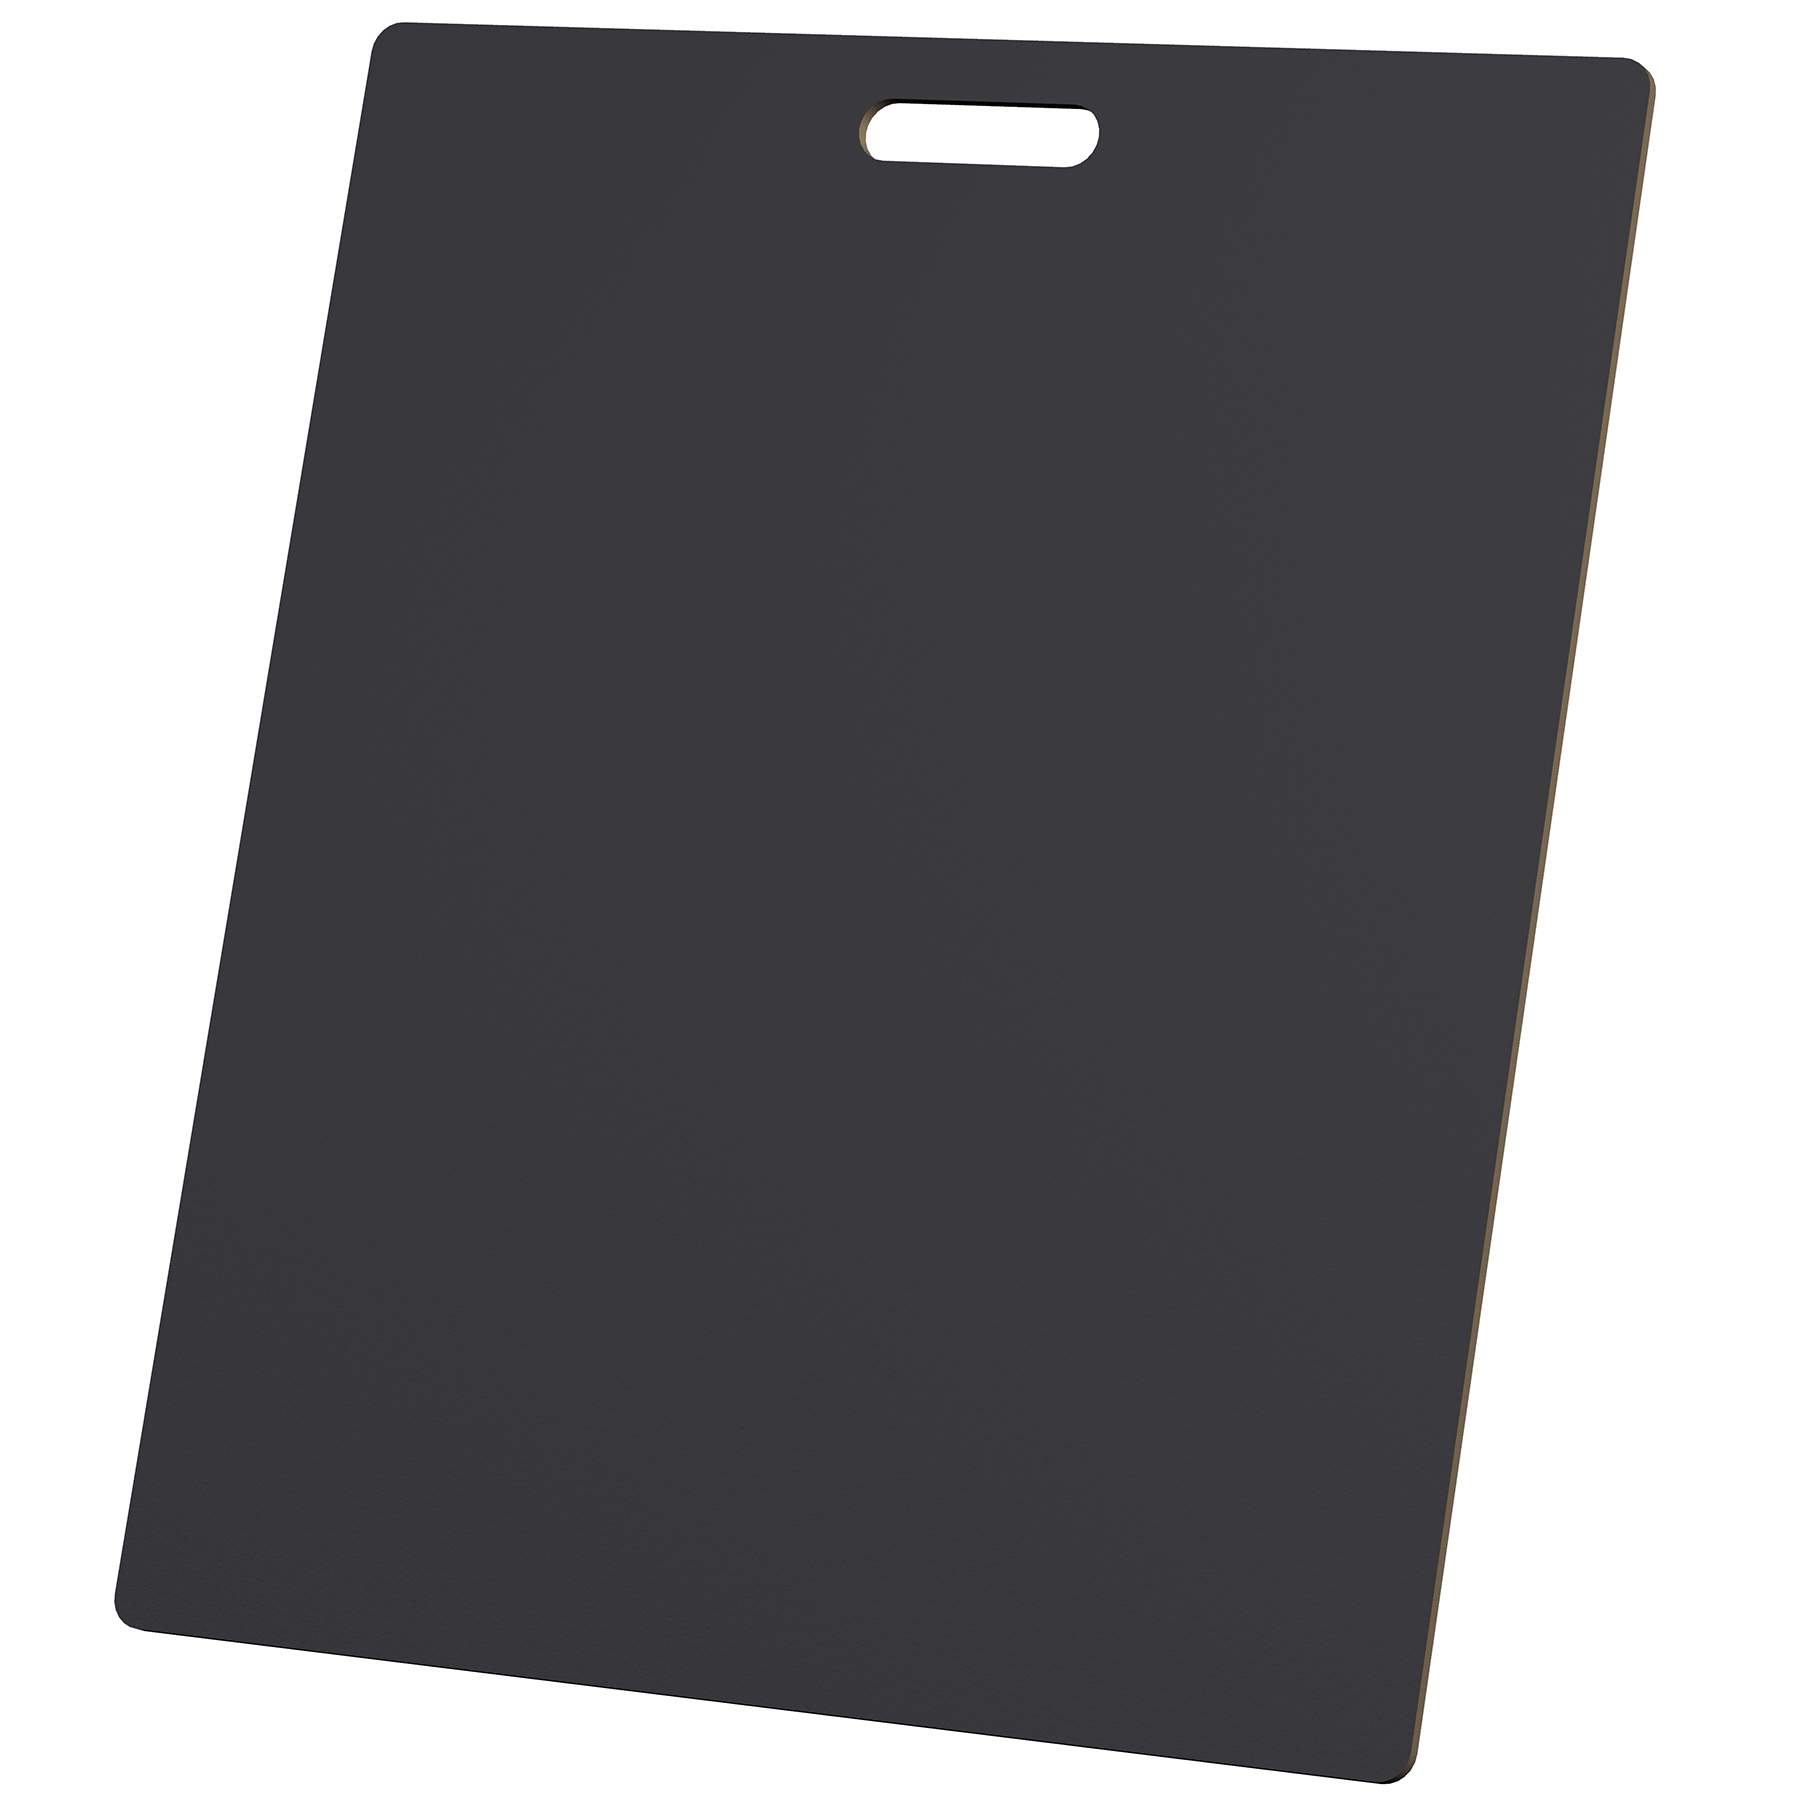 22 inch x 26 inch Black Sample Display Board for Tile Flooring Stone Wood